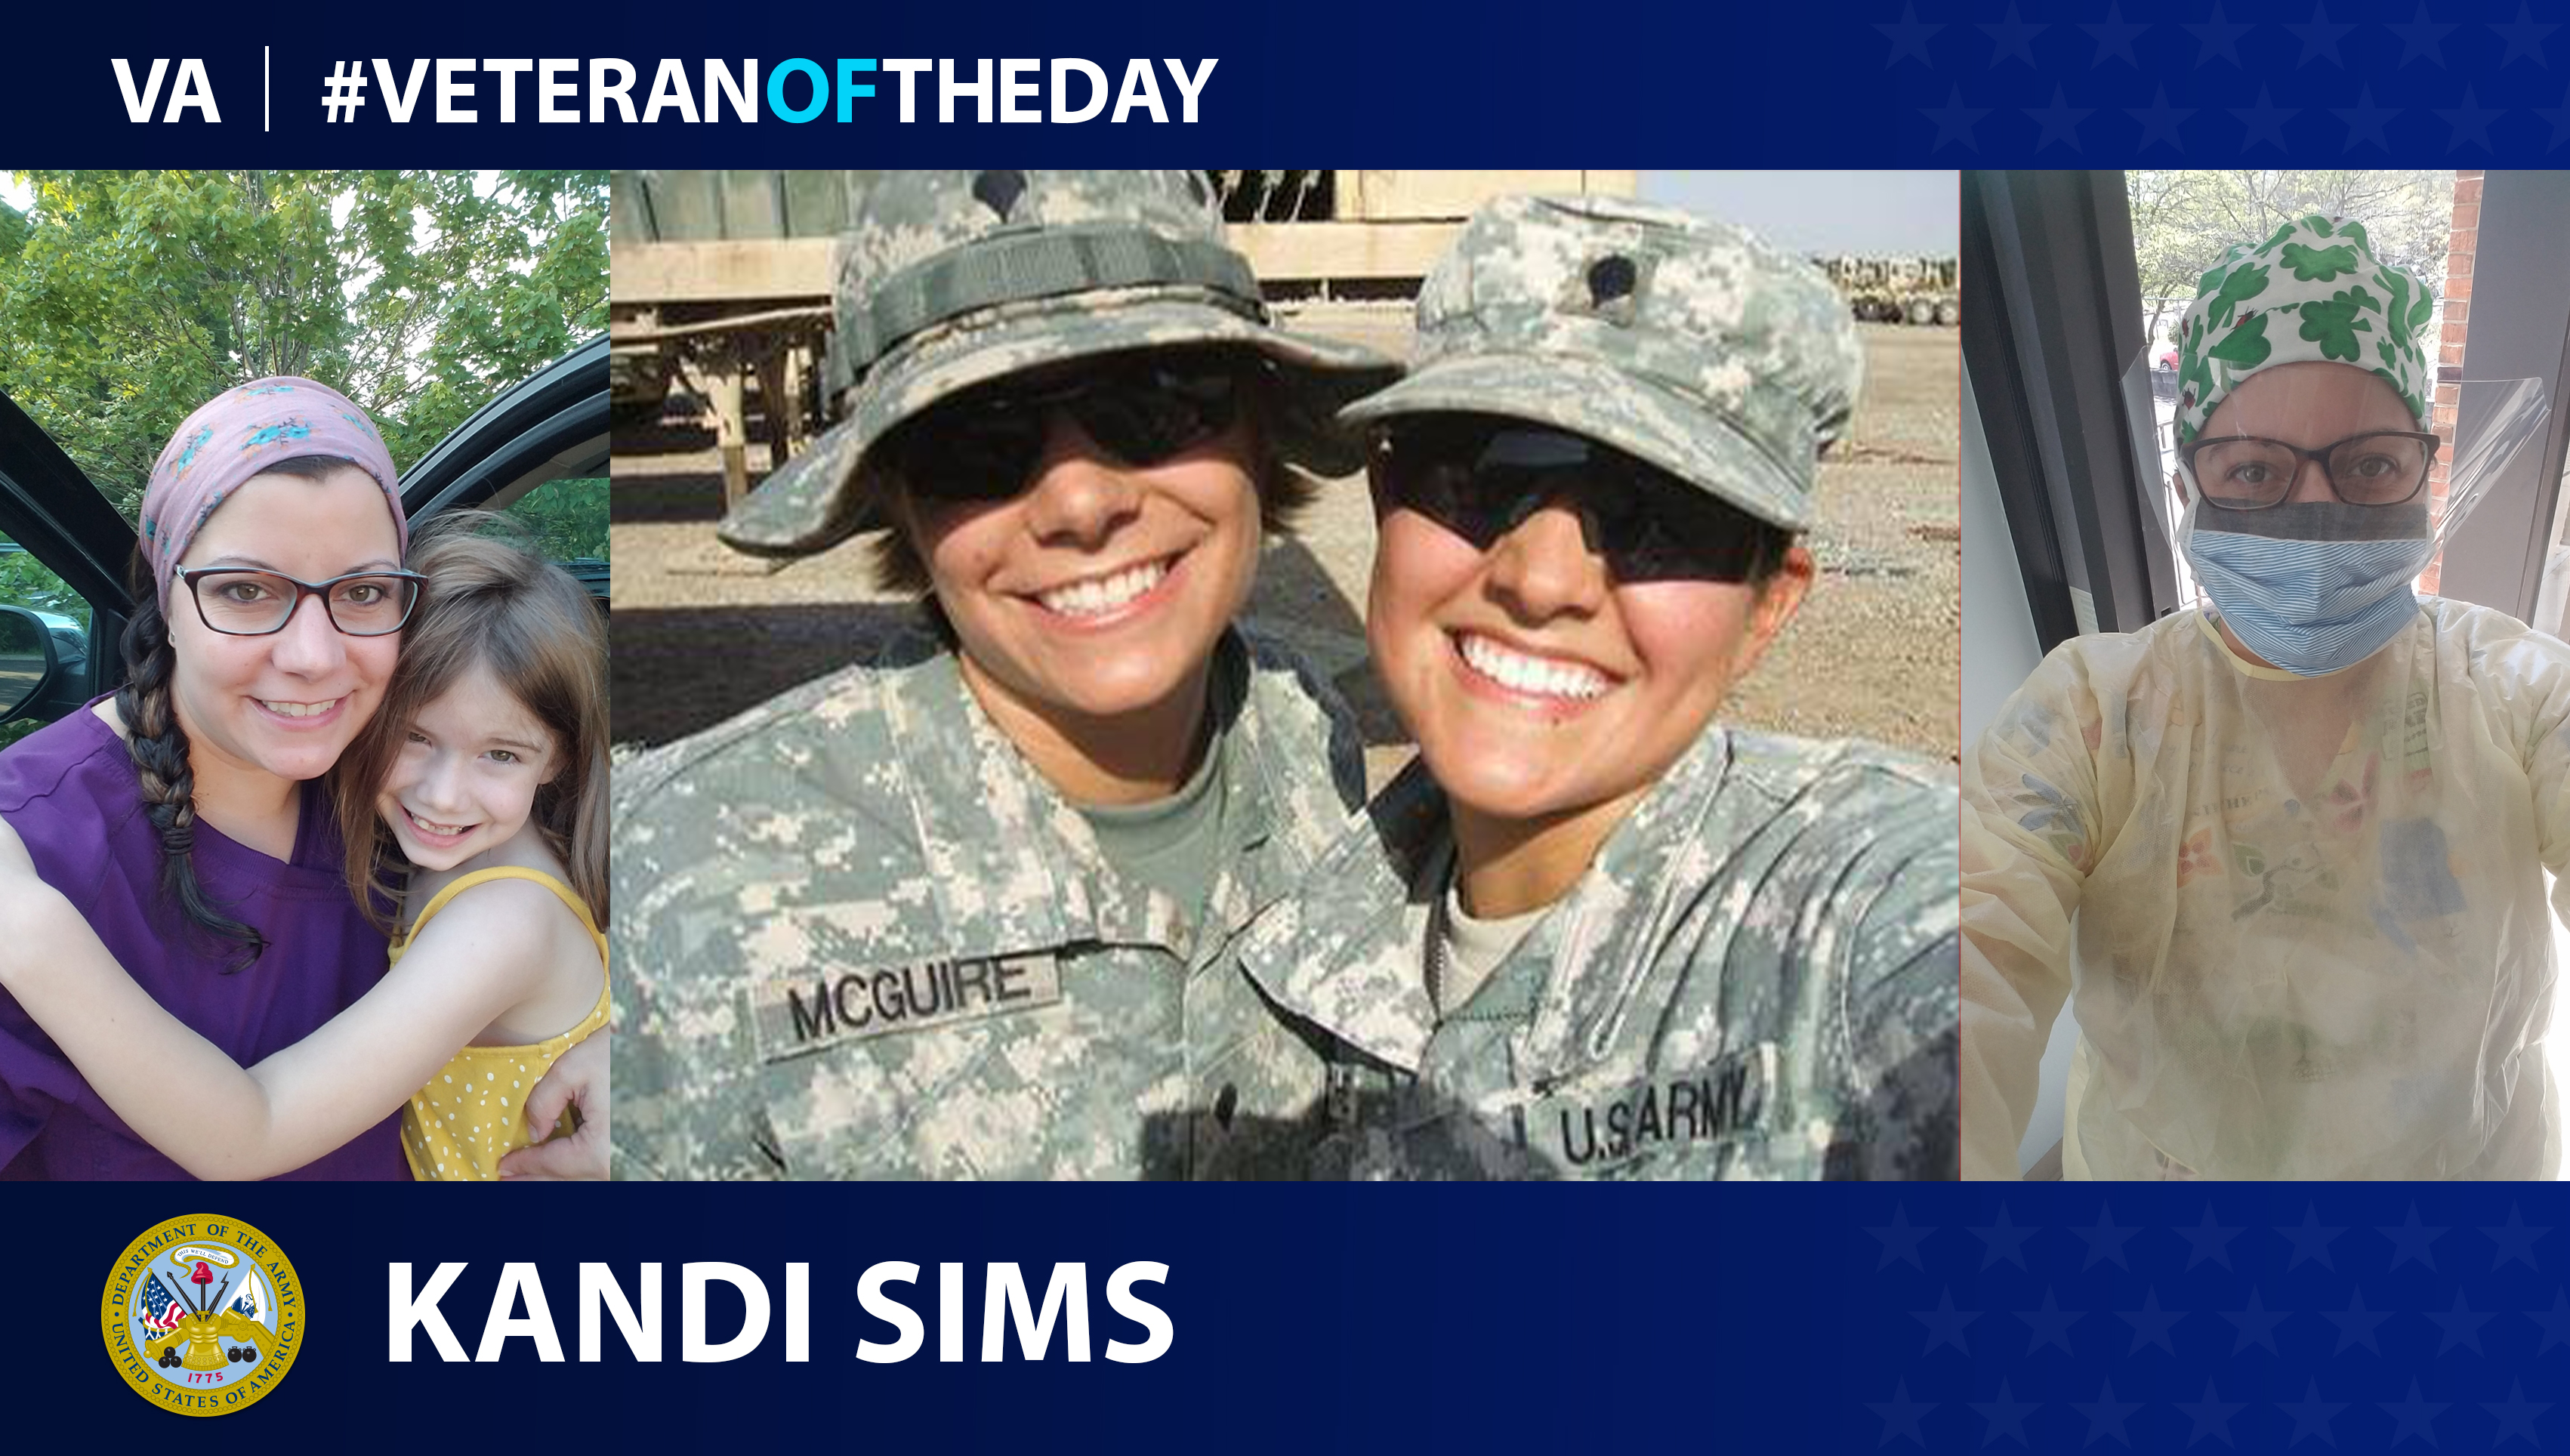 Army Veteran Kandi Sims is today's Veteran of the Day.